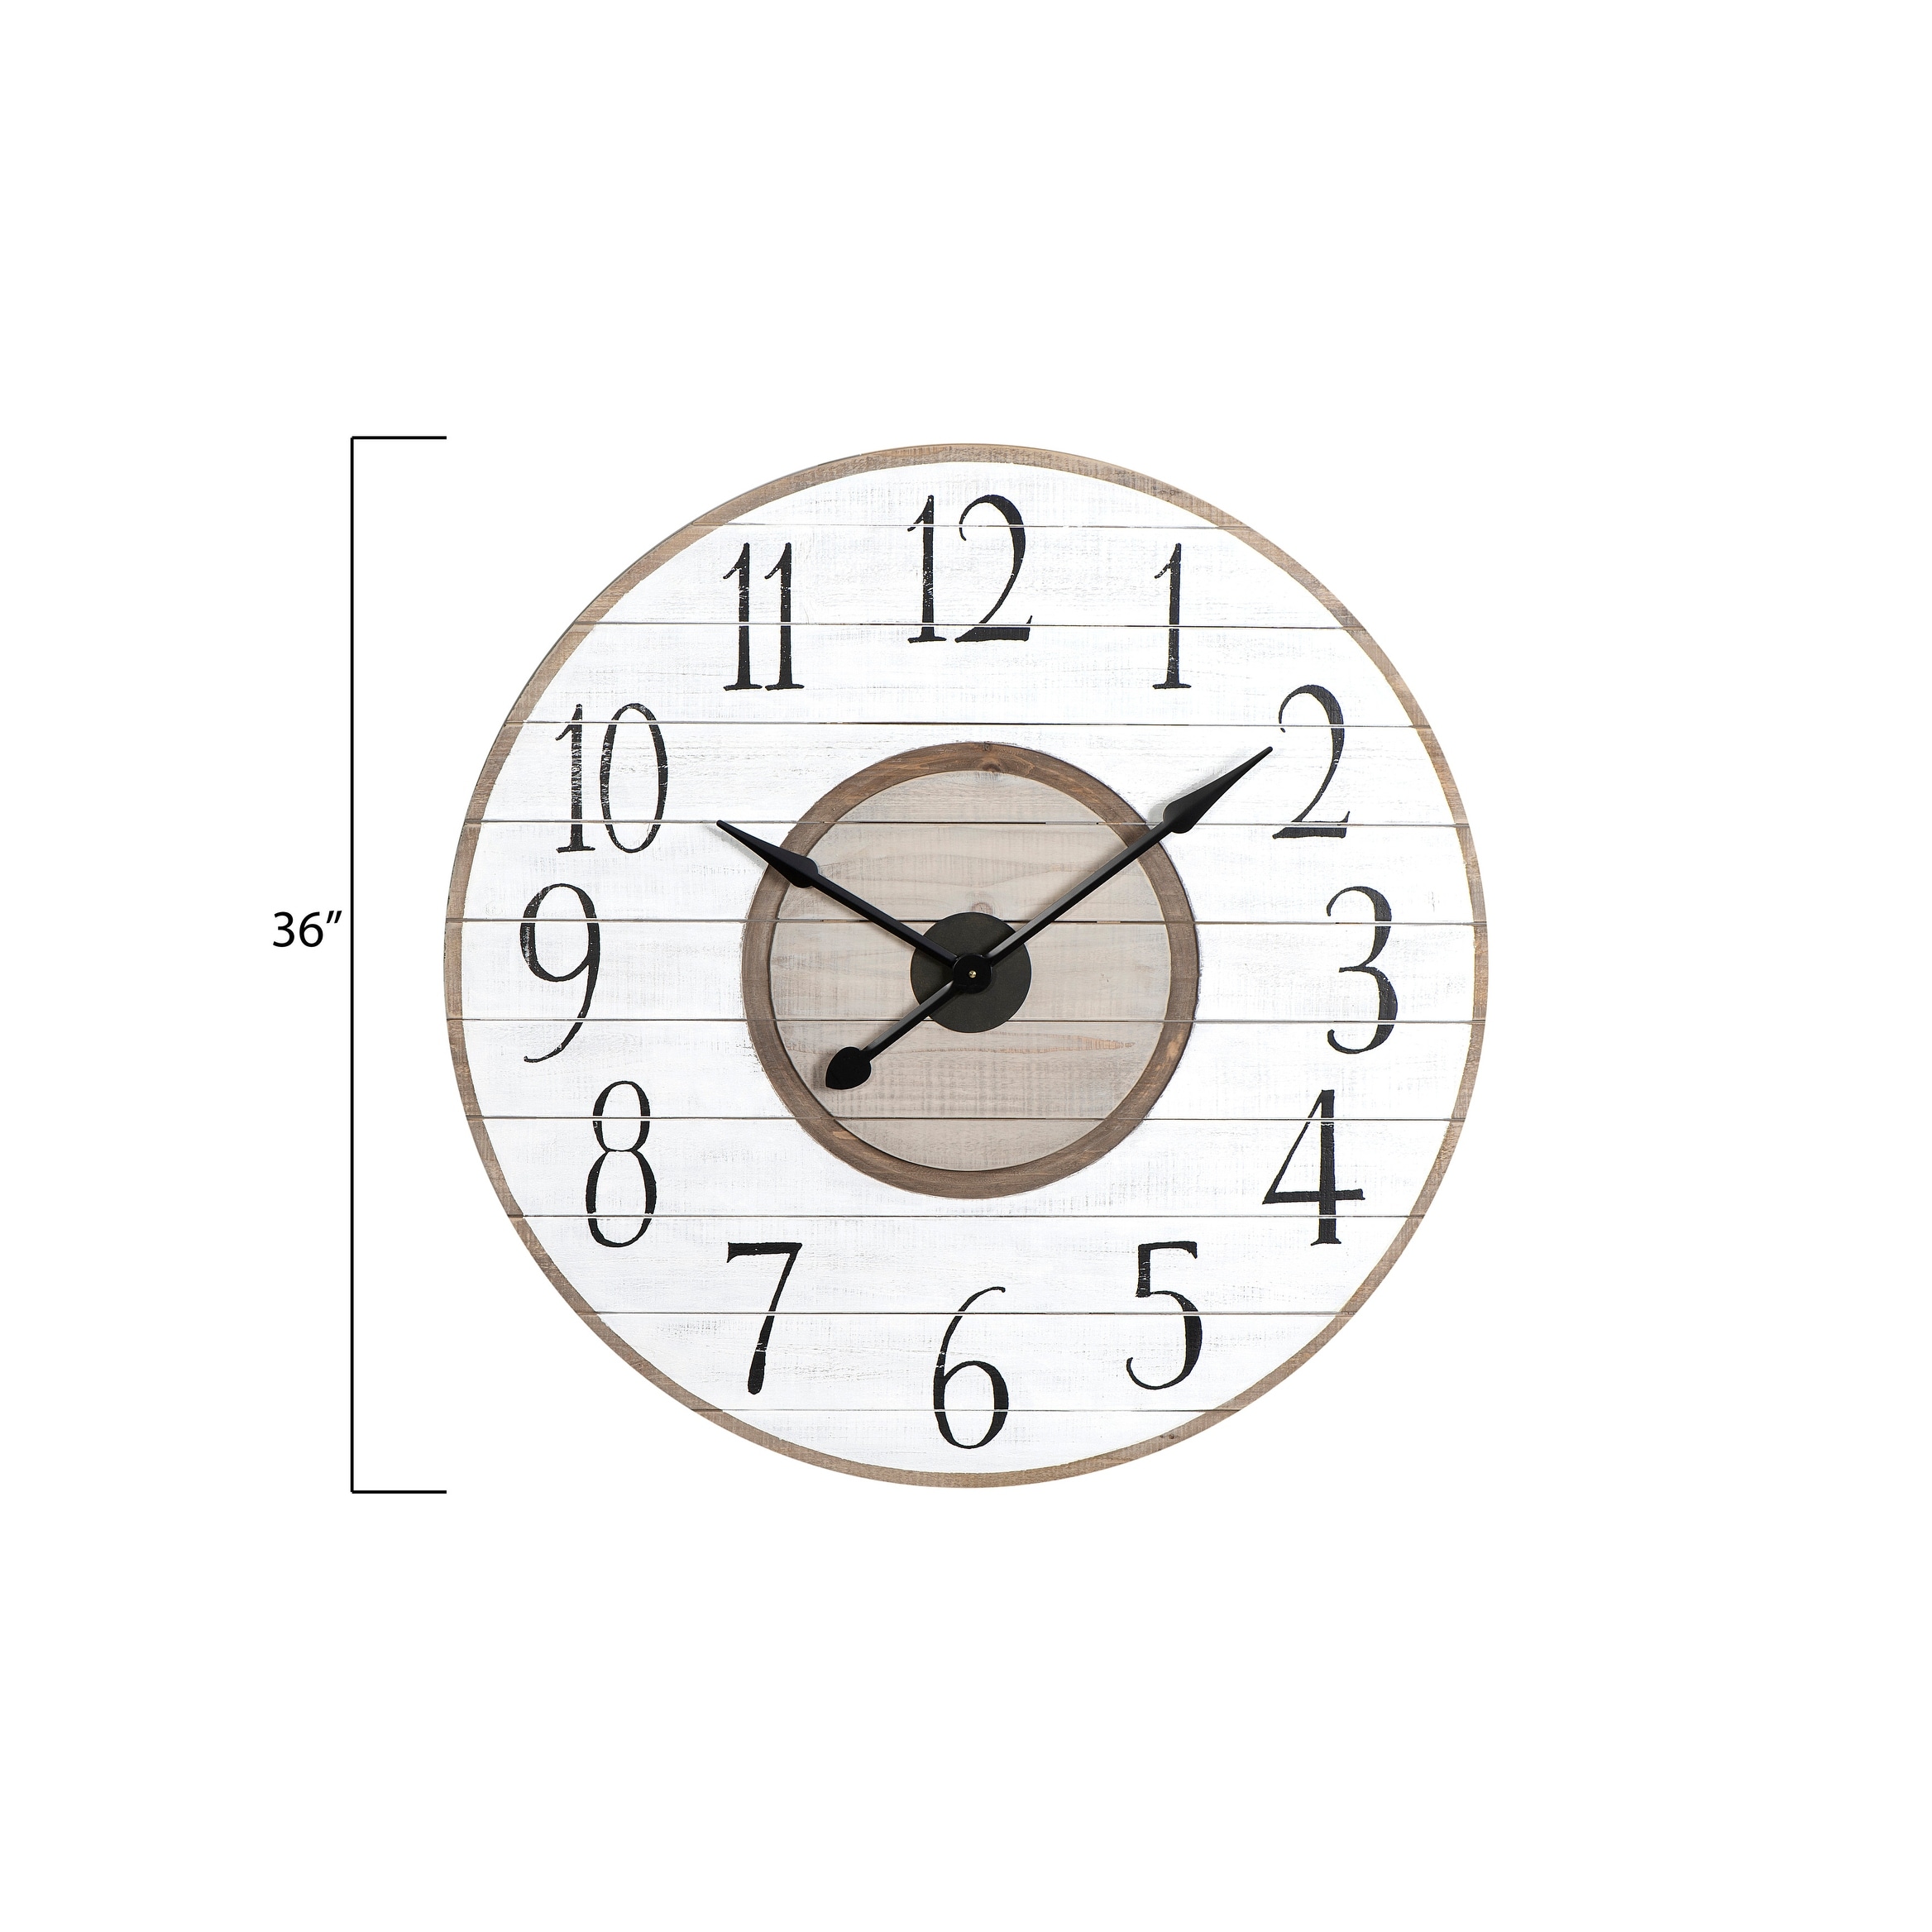 36 inch wall clocks for sale